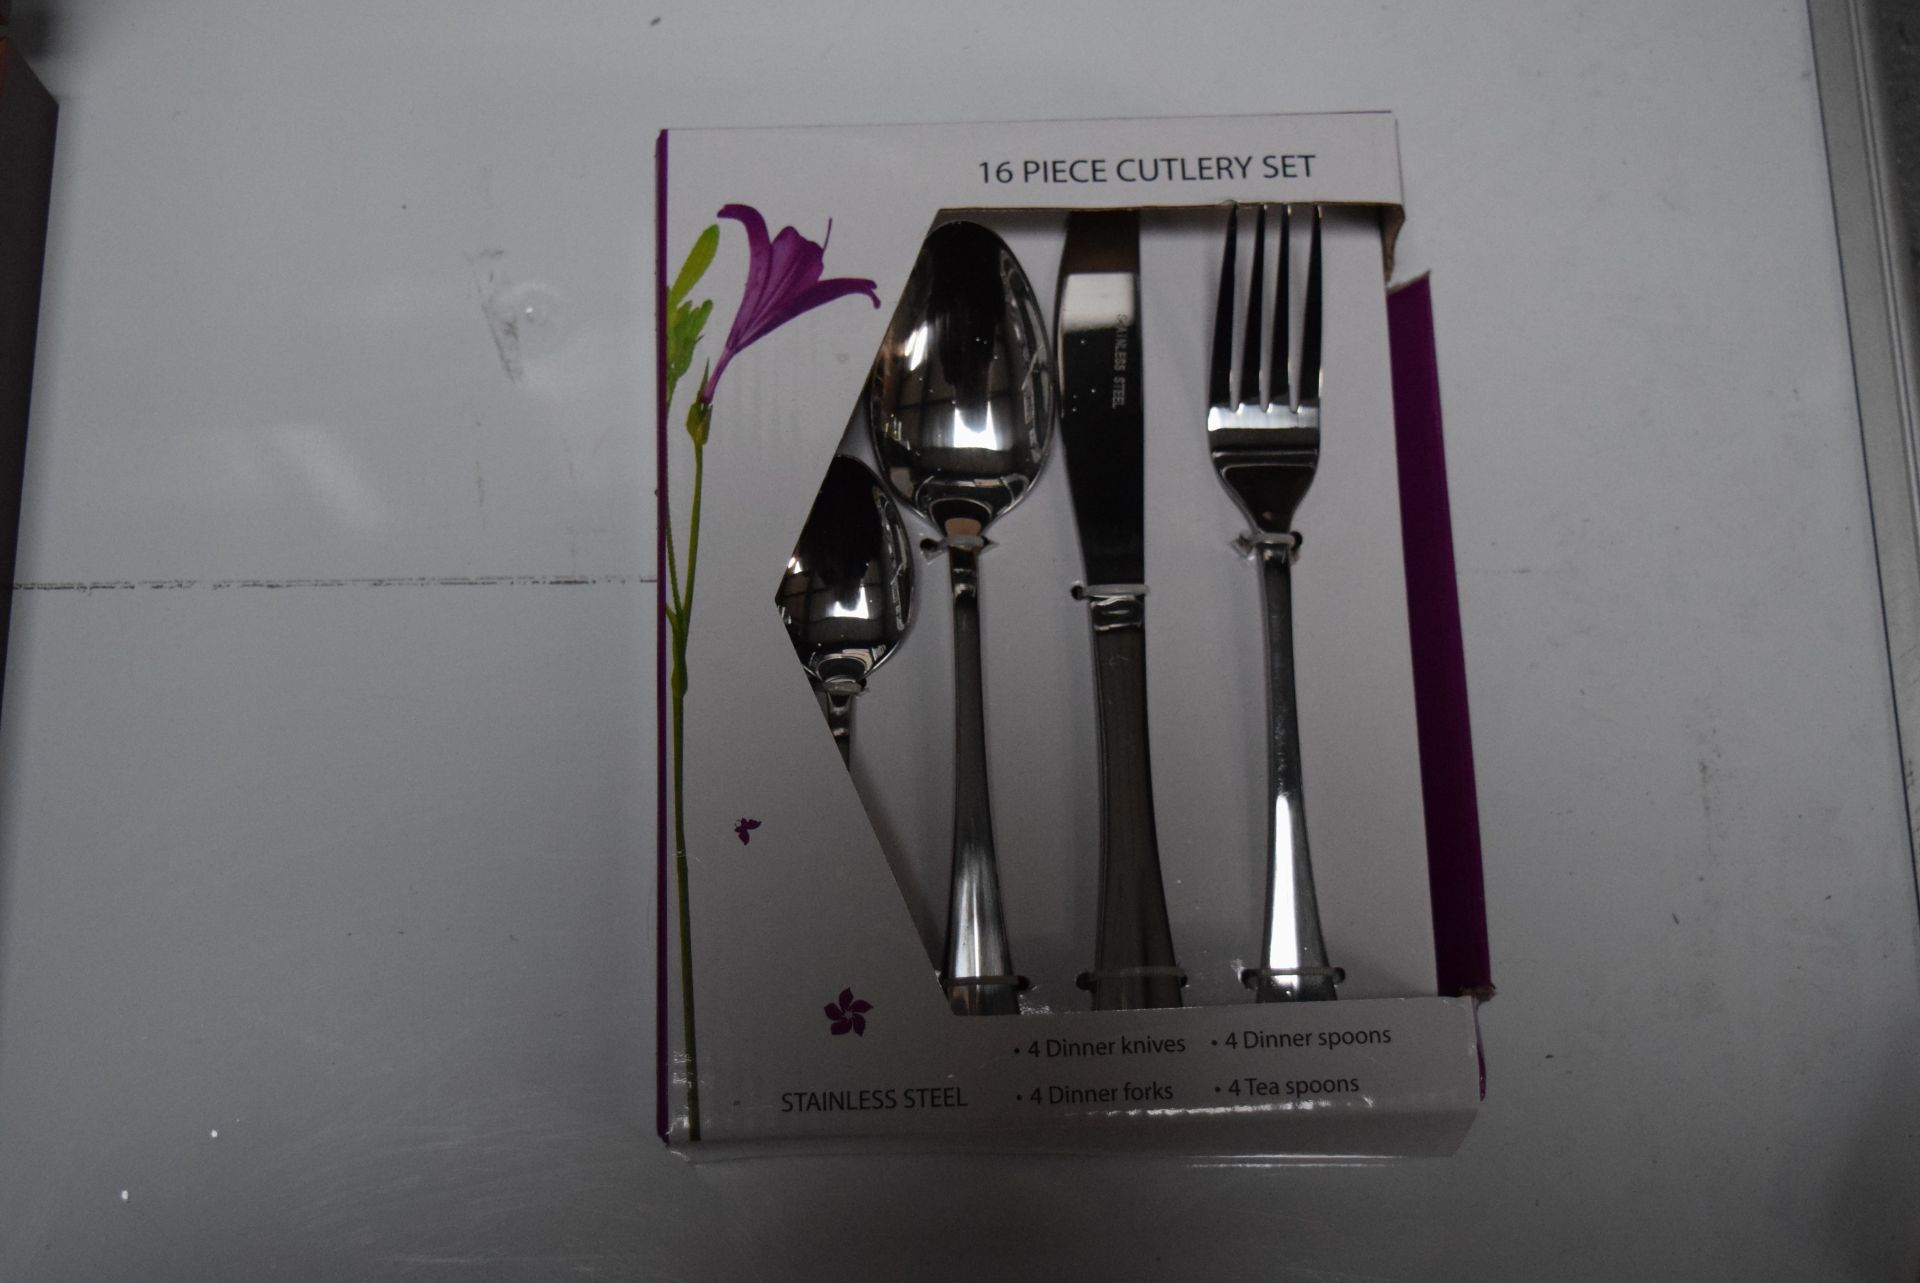 1 x BOXED BRAND NEW ROMAN CONRAD COLLECTION WEB 16 PIECE CUTLERY SET IN STAINLESS STEEL (XYX-16-1)